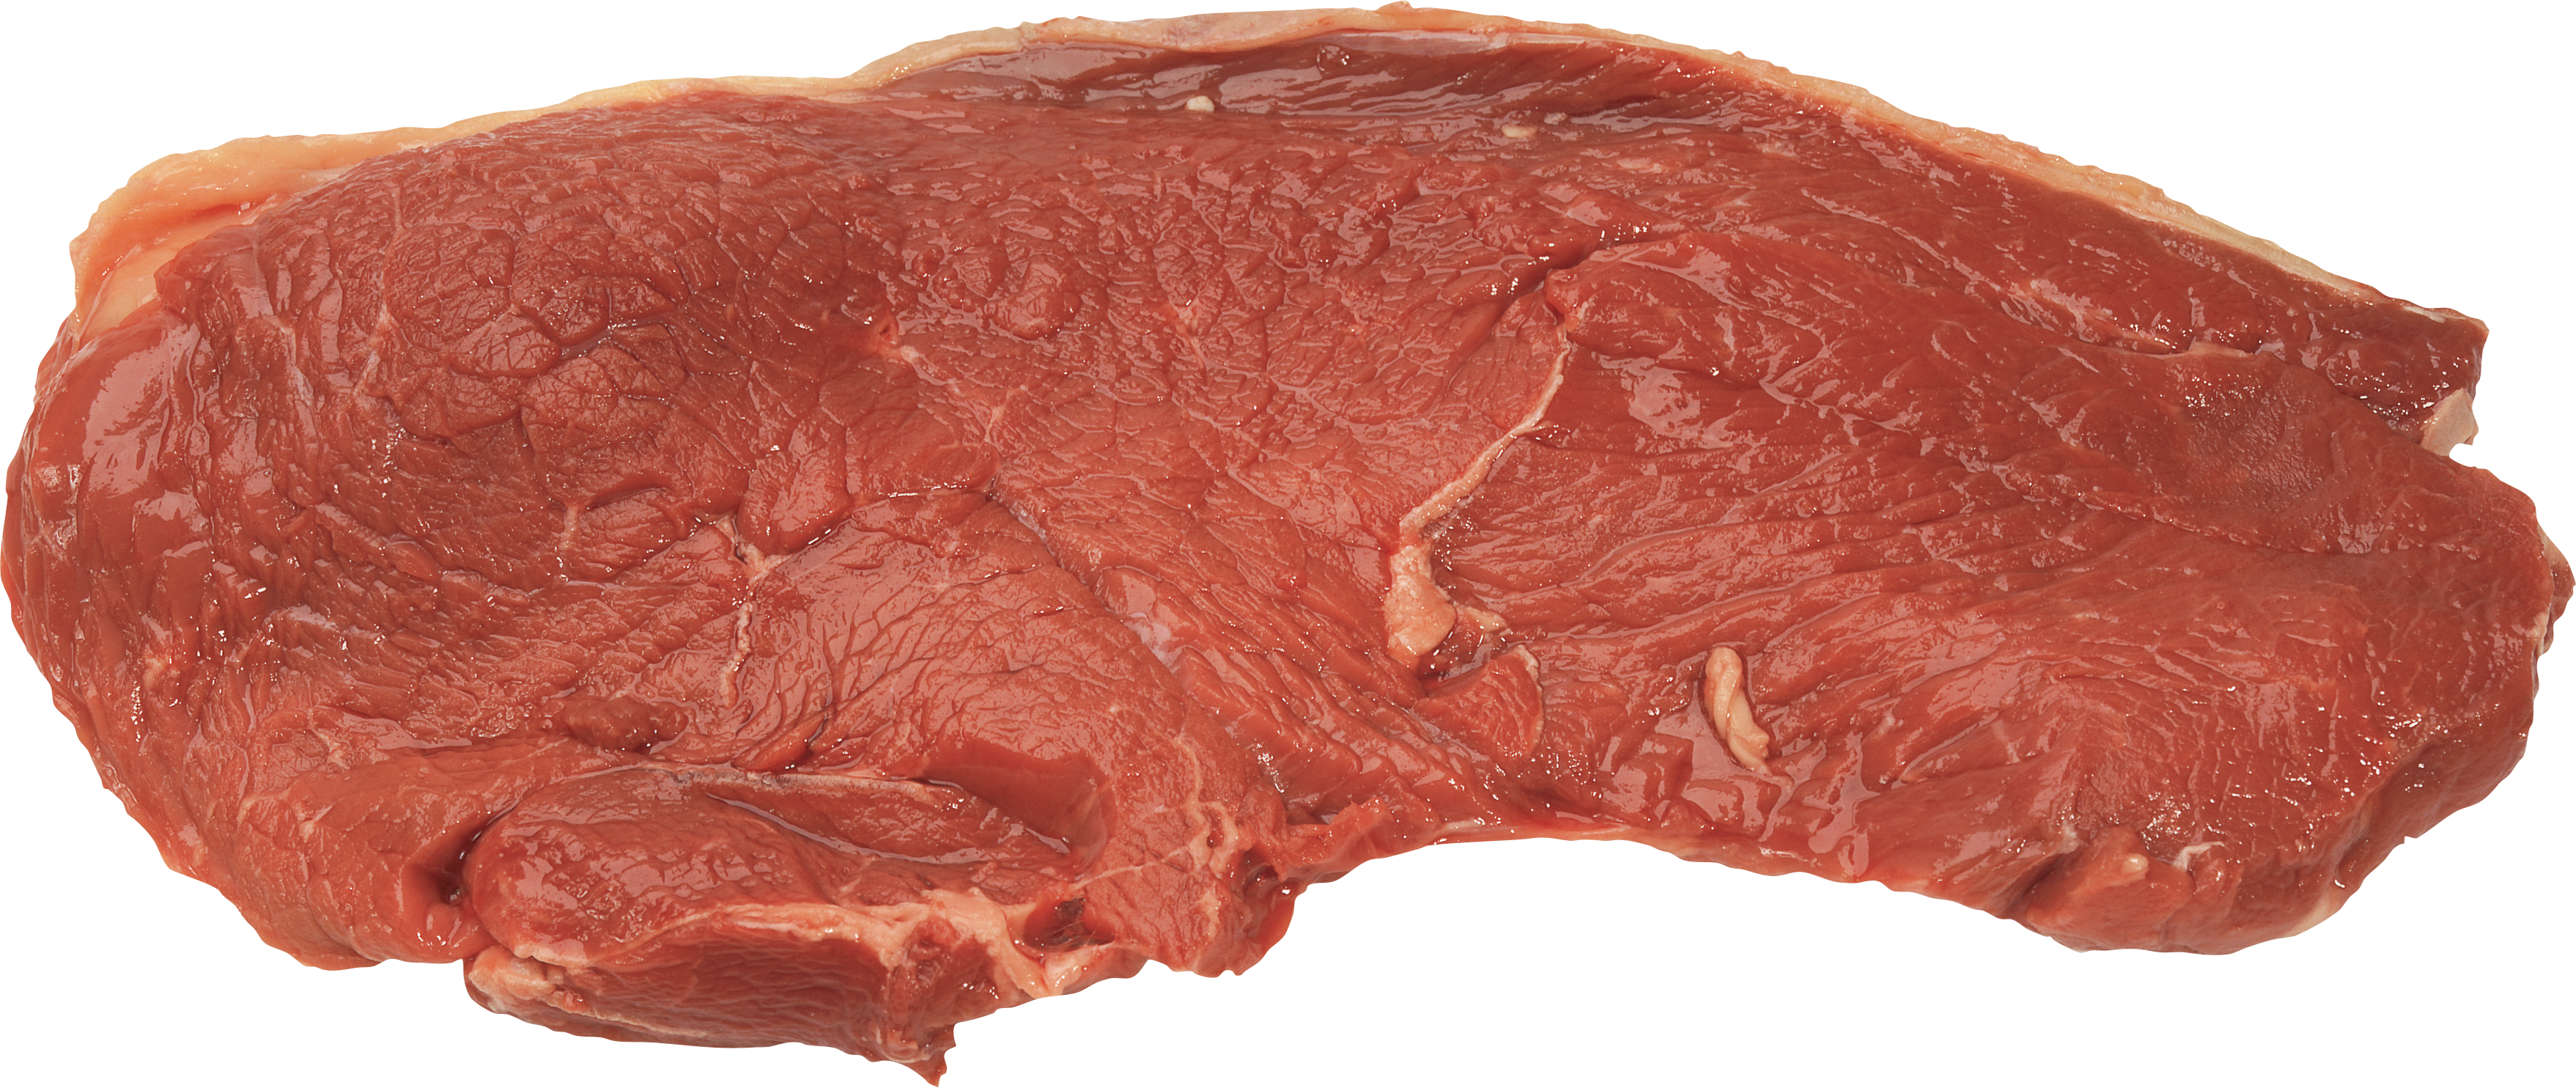 Meat Png Image Meat